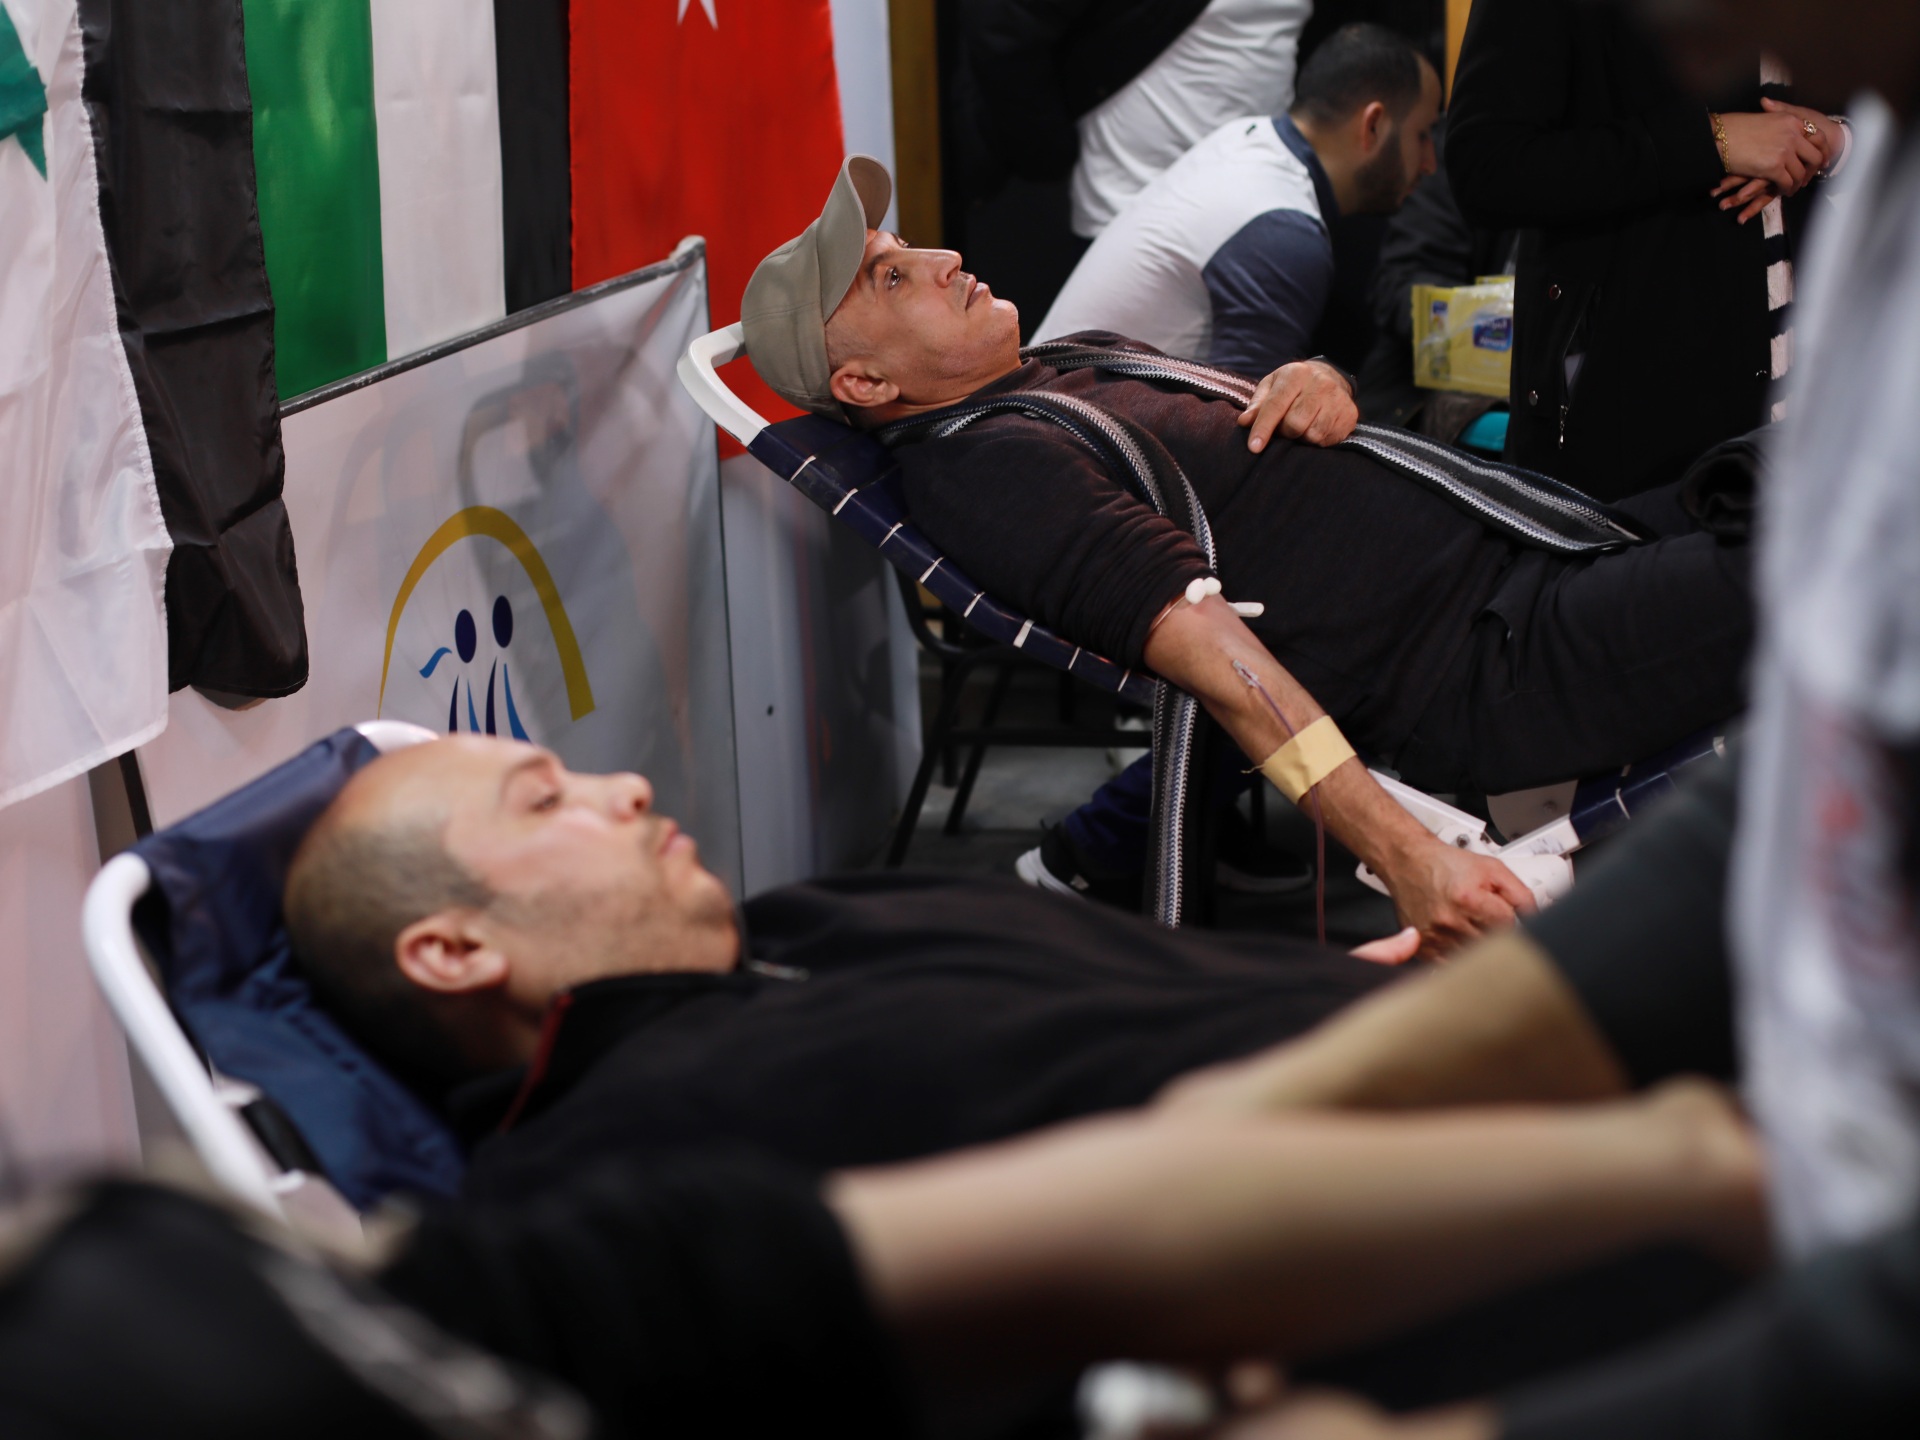 ‘One body’: Gaza launches blood donations after deadly earthquake